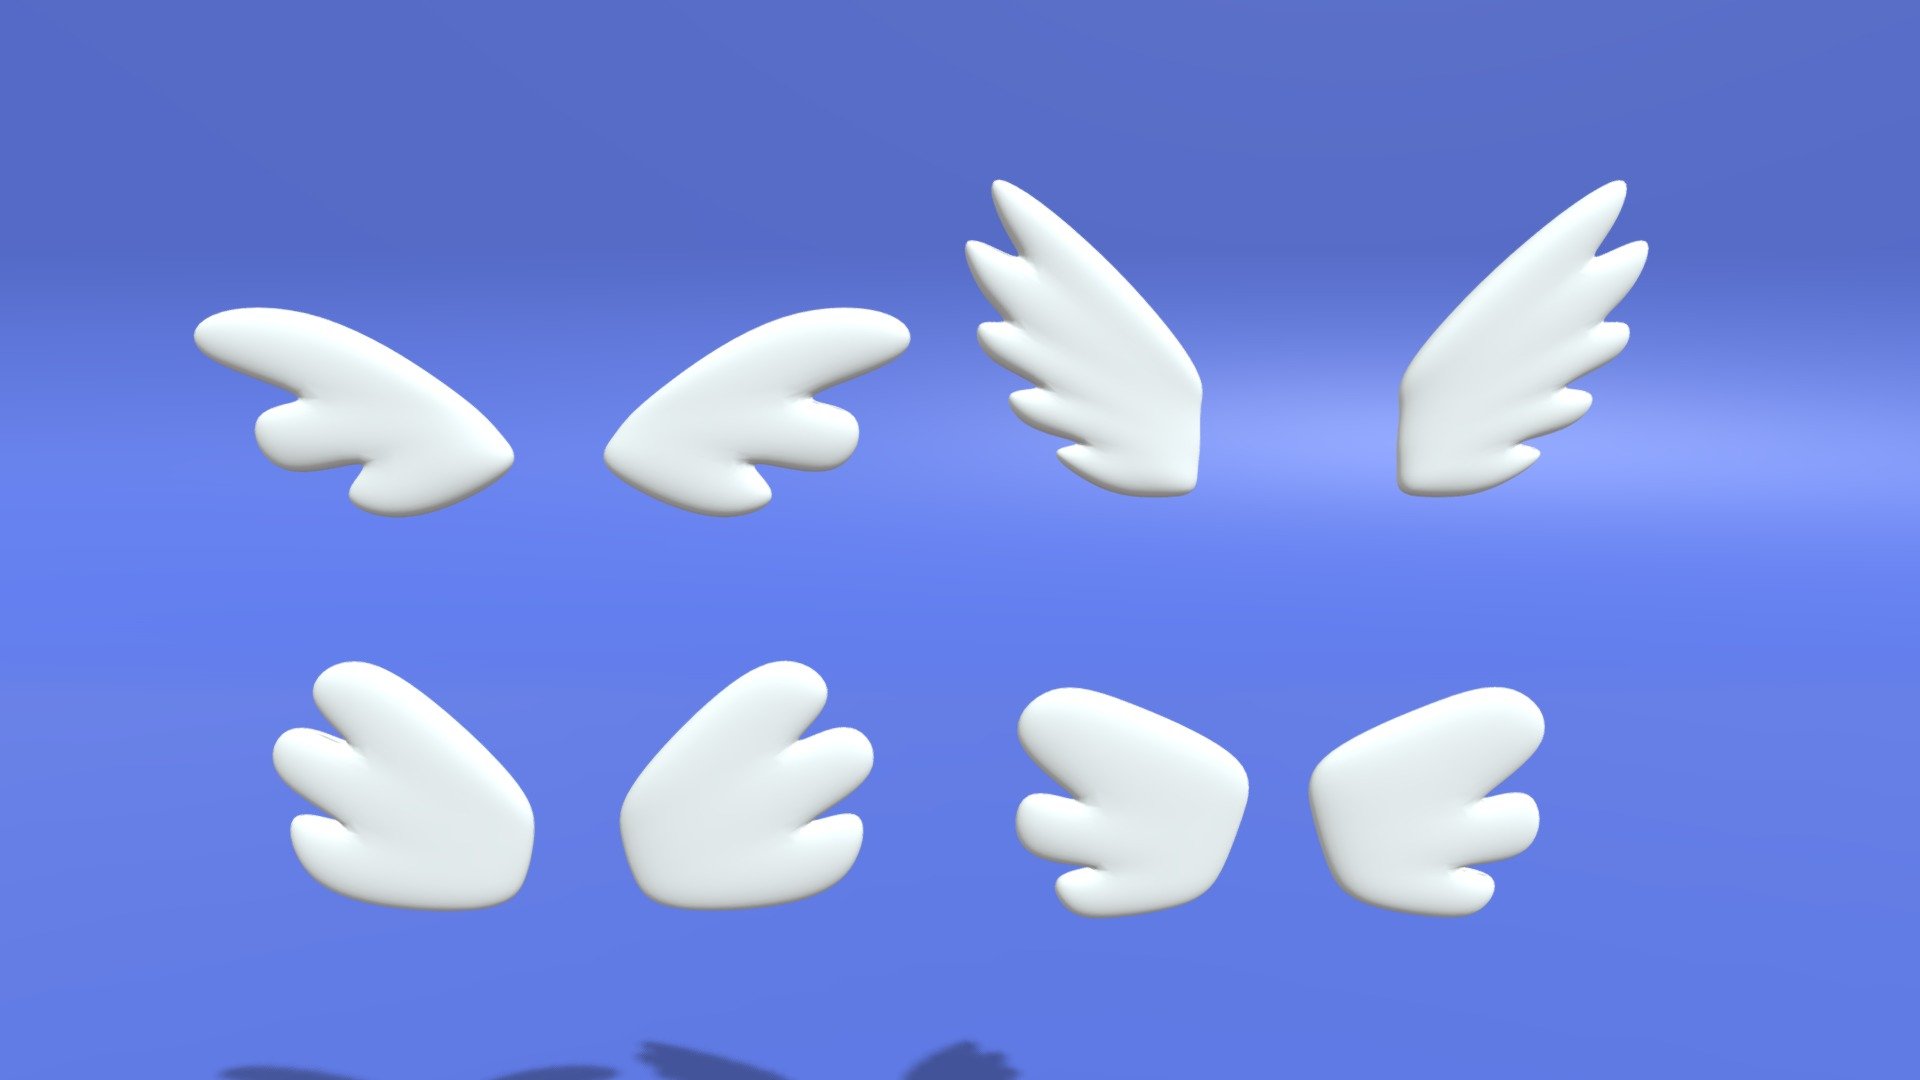 -Cartoon Cute Wings Collection.

-Vert: 15,376 poly: 15,360.

-This product contains 8 objects.

-Materials and objects have the correct names.

-This product was created in Blender 2.935.

-Formats: blend, fbx, obj, c4d, dae, abc, stl, glb,unity.

-We hope you enjoy this model.

-Thank you 3d model